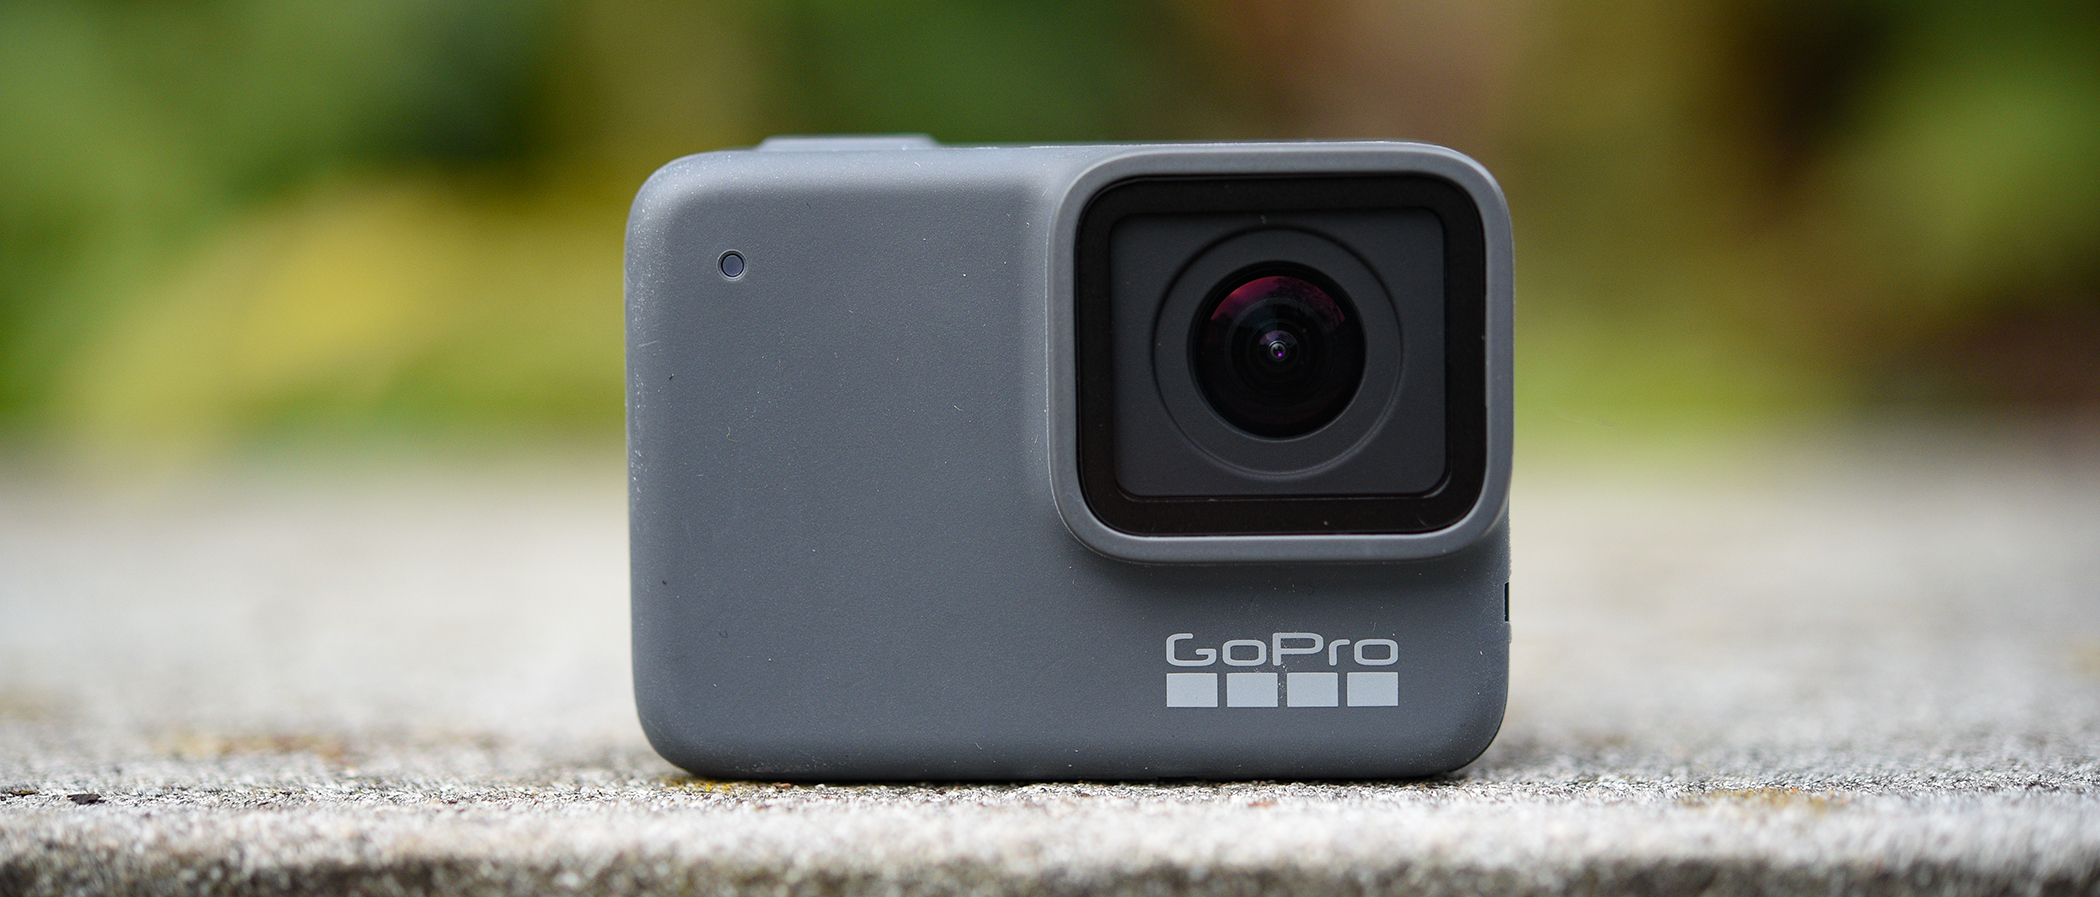 GoPro Hero 7 Silver review